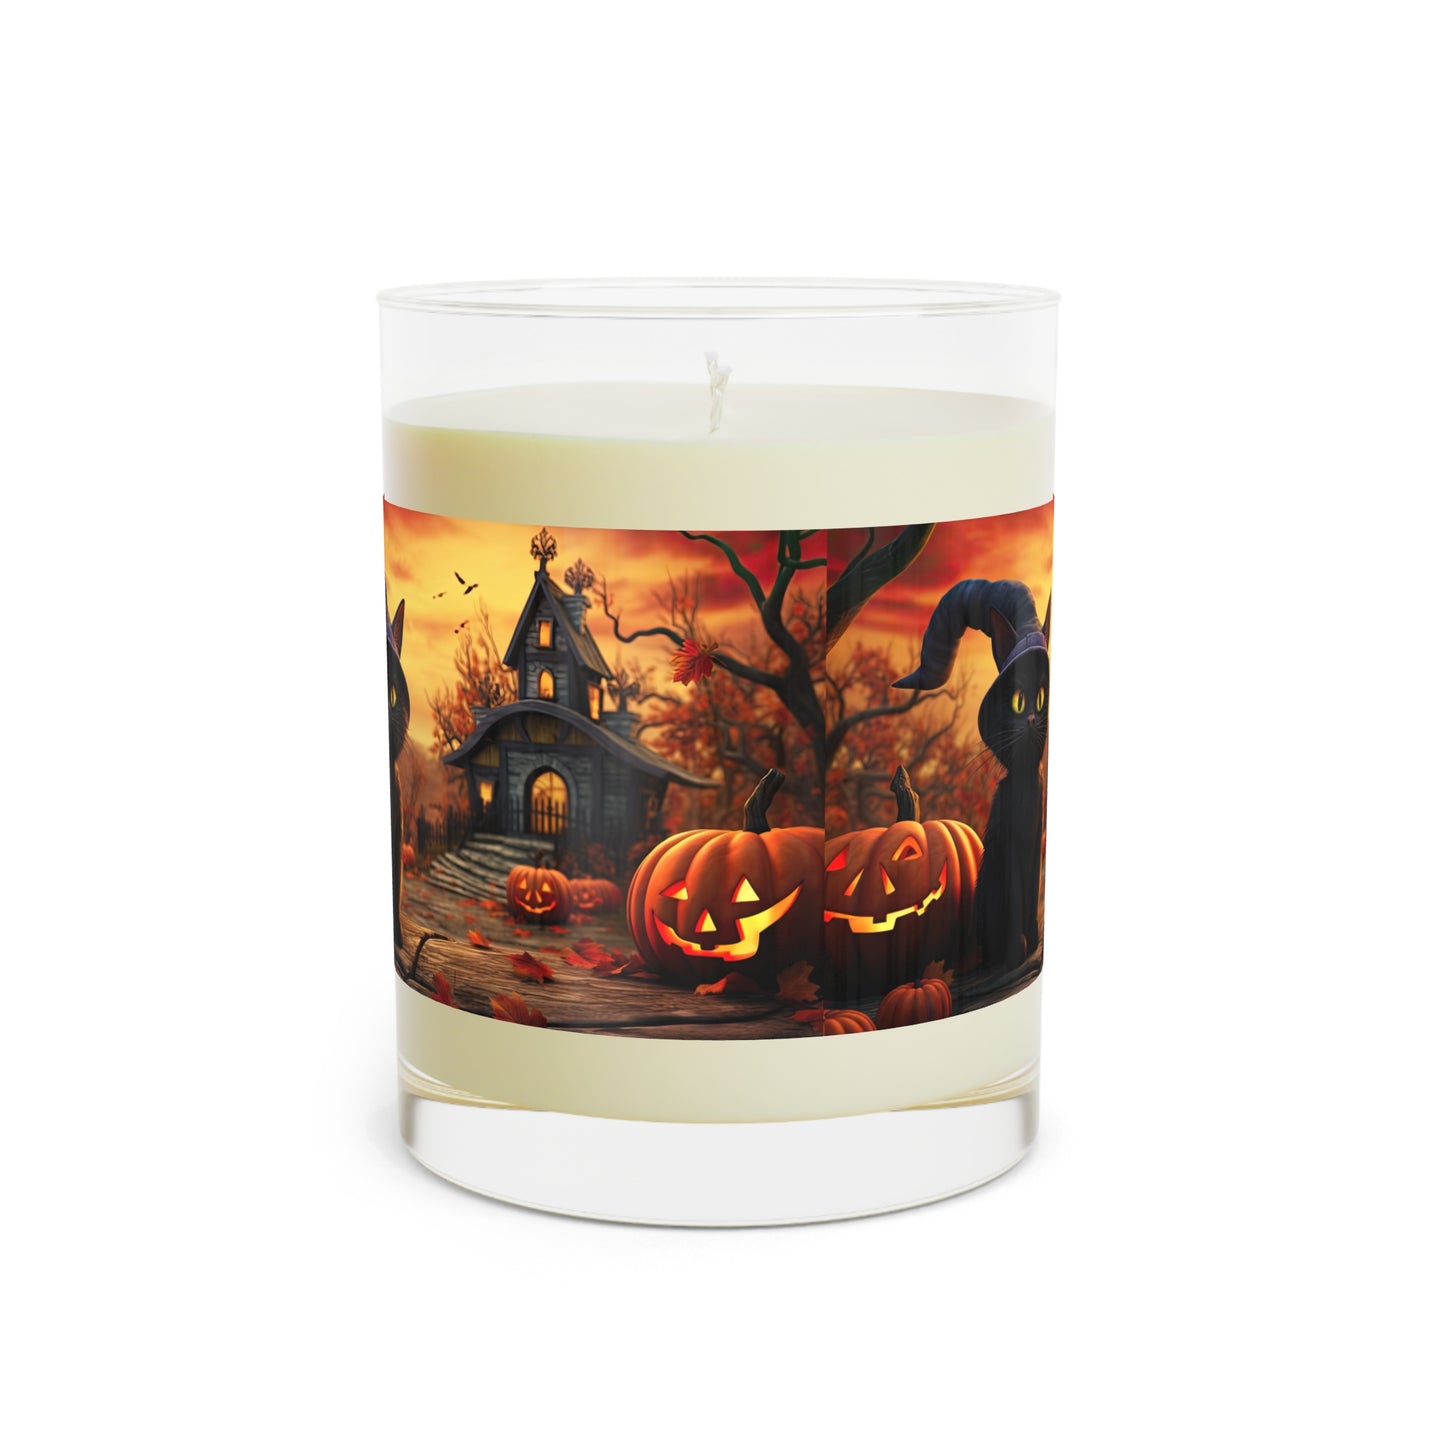 Witch Cat With Breathtaking Fall Time Schoolhouse/Church With Smile Carved Halloween Pumpkins , Scented Candle - Full Glass, 11oz